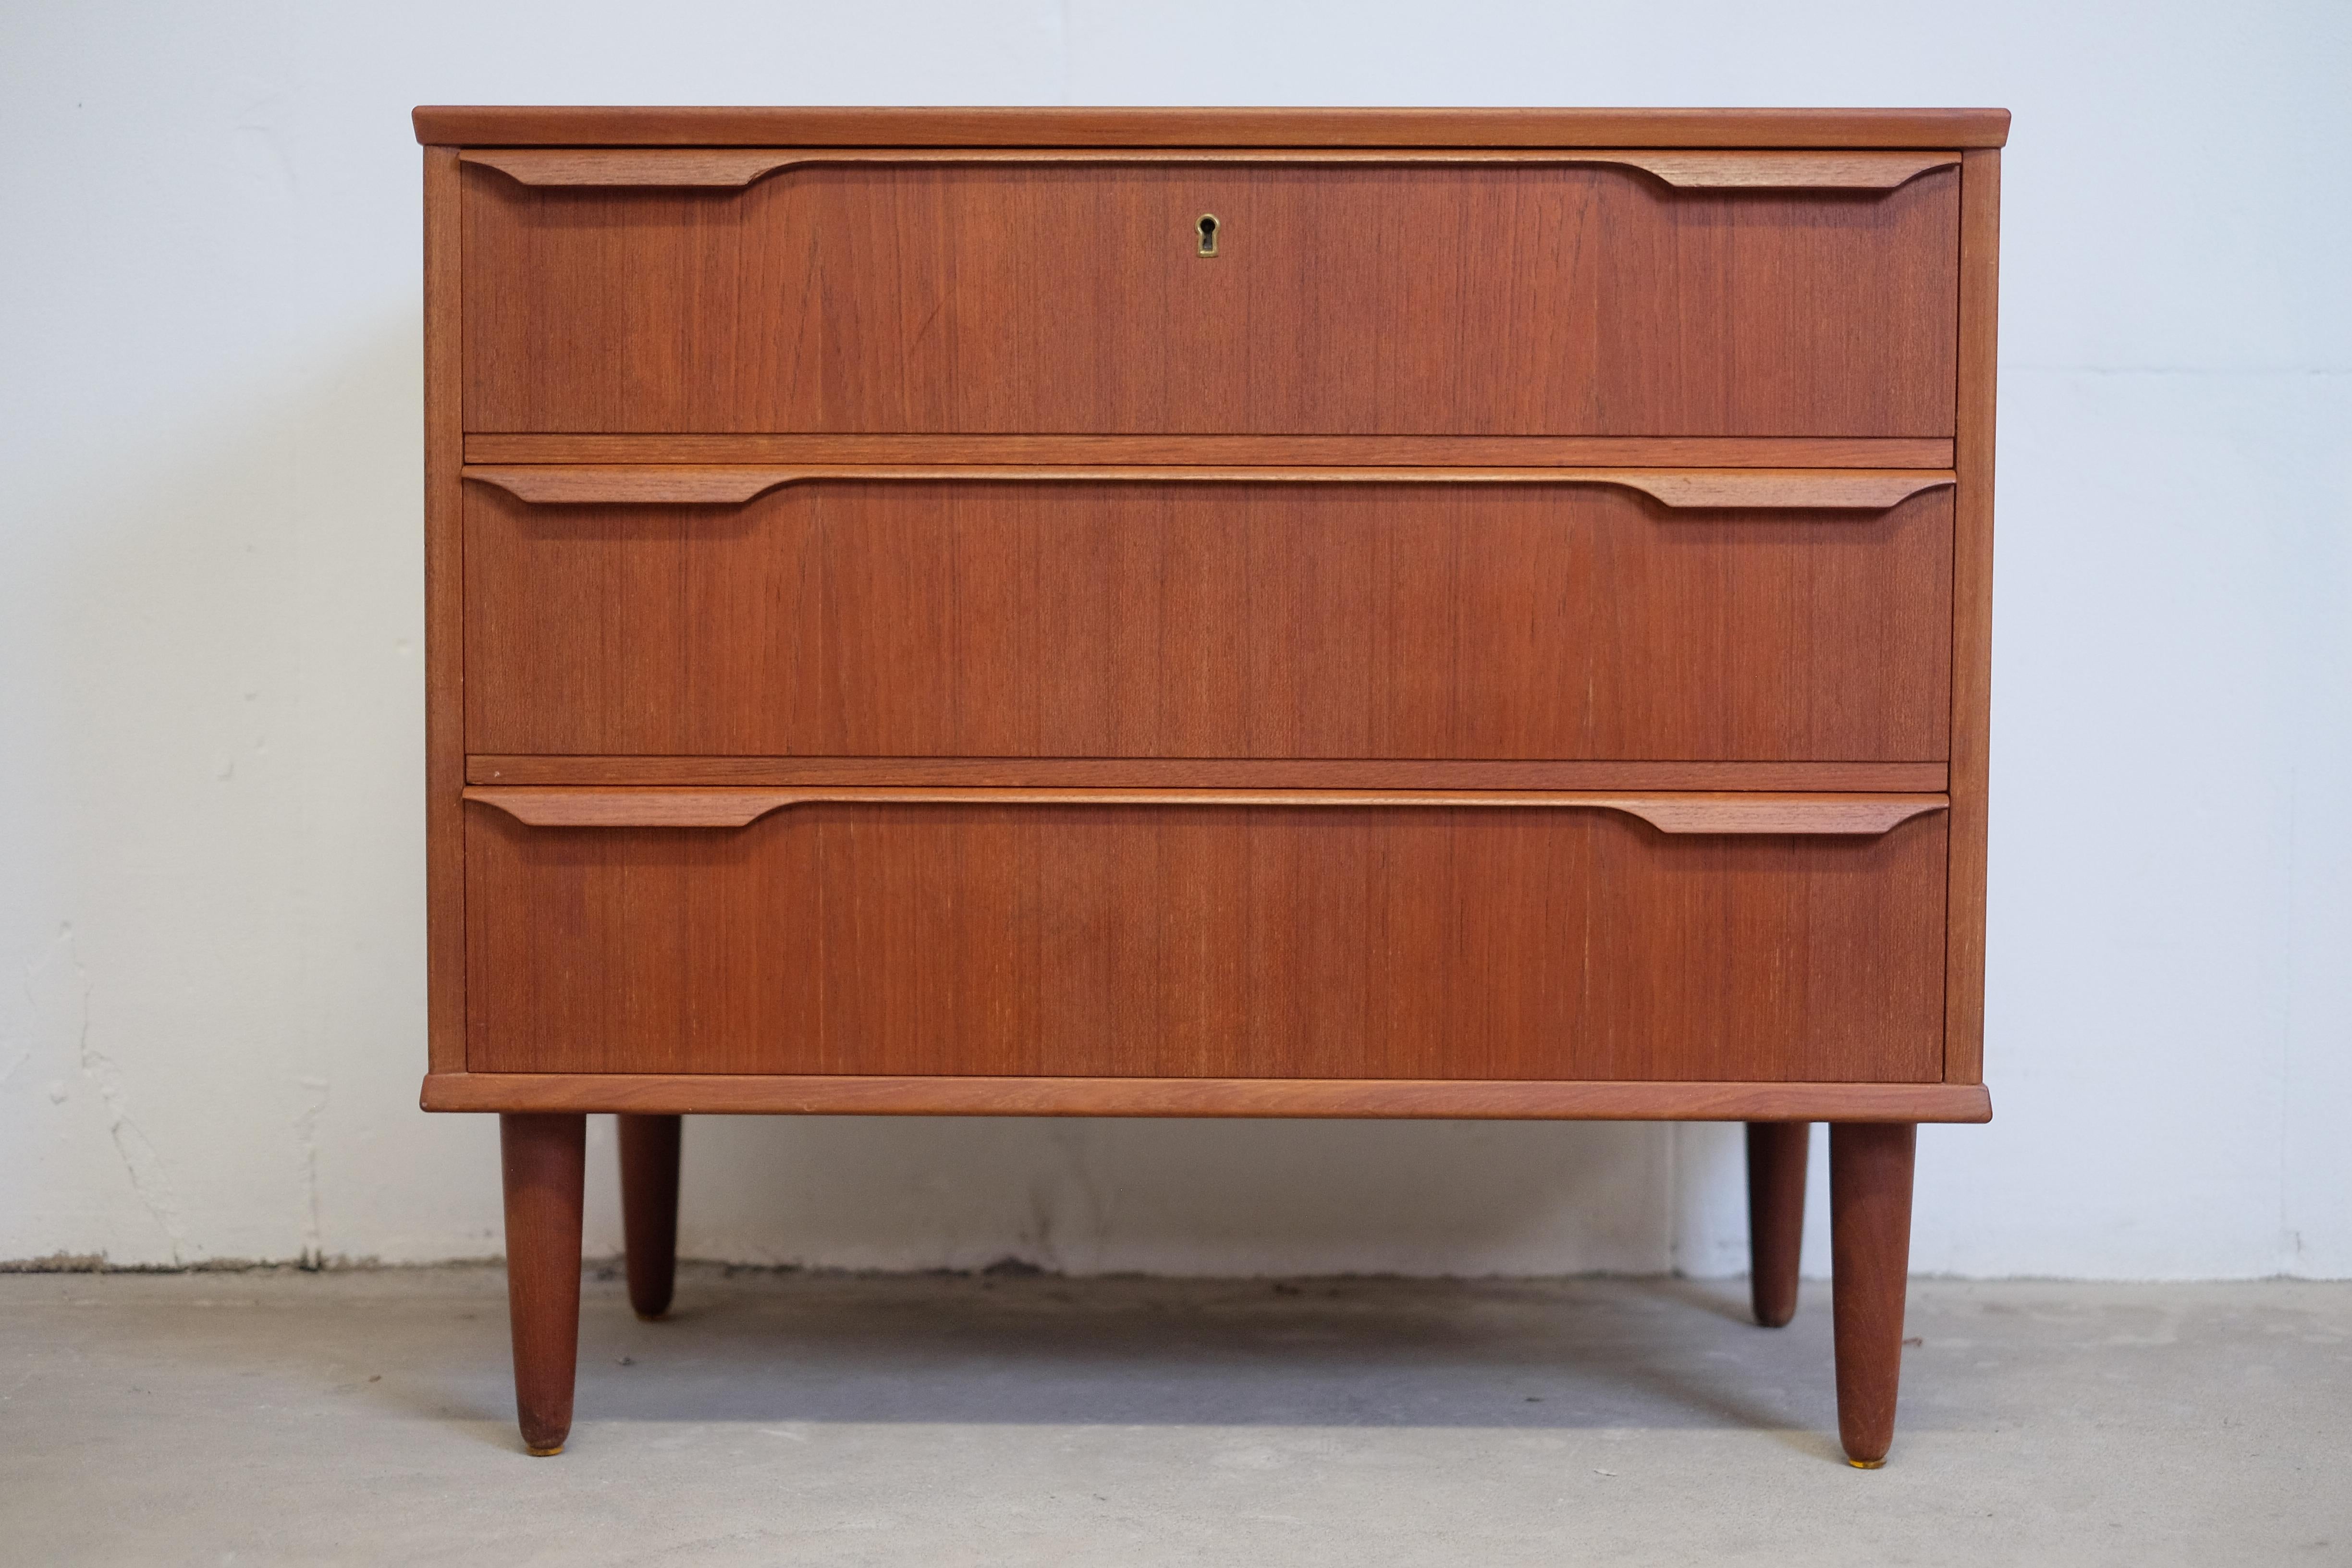 Dresser in teak, Danish design - labelled with furniture control.
The dresser is in great condition with few signs of wear and has been, it have been properly cleaned and then oiled.
Great quality and a beautiful look. Suitable all over the